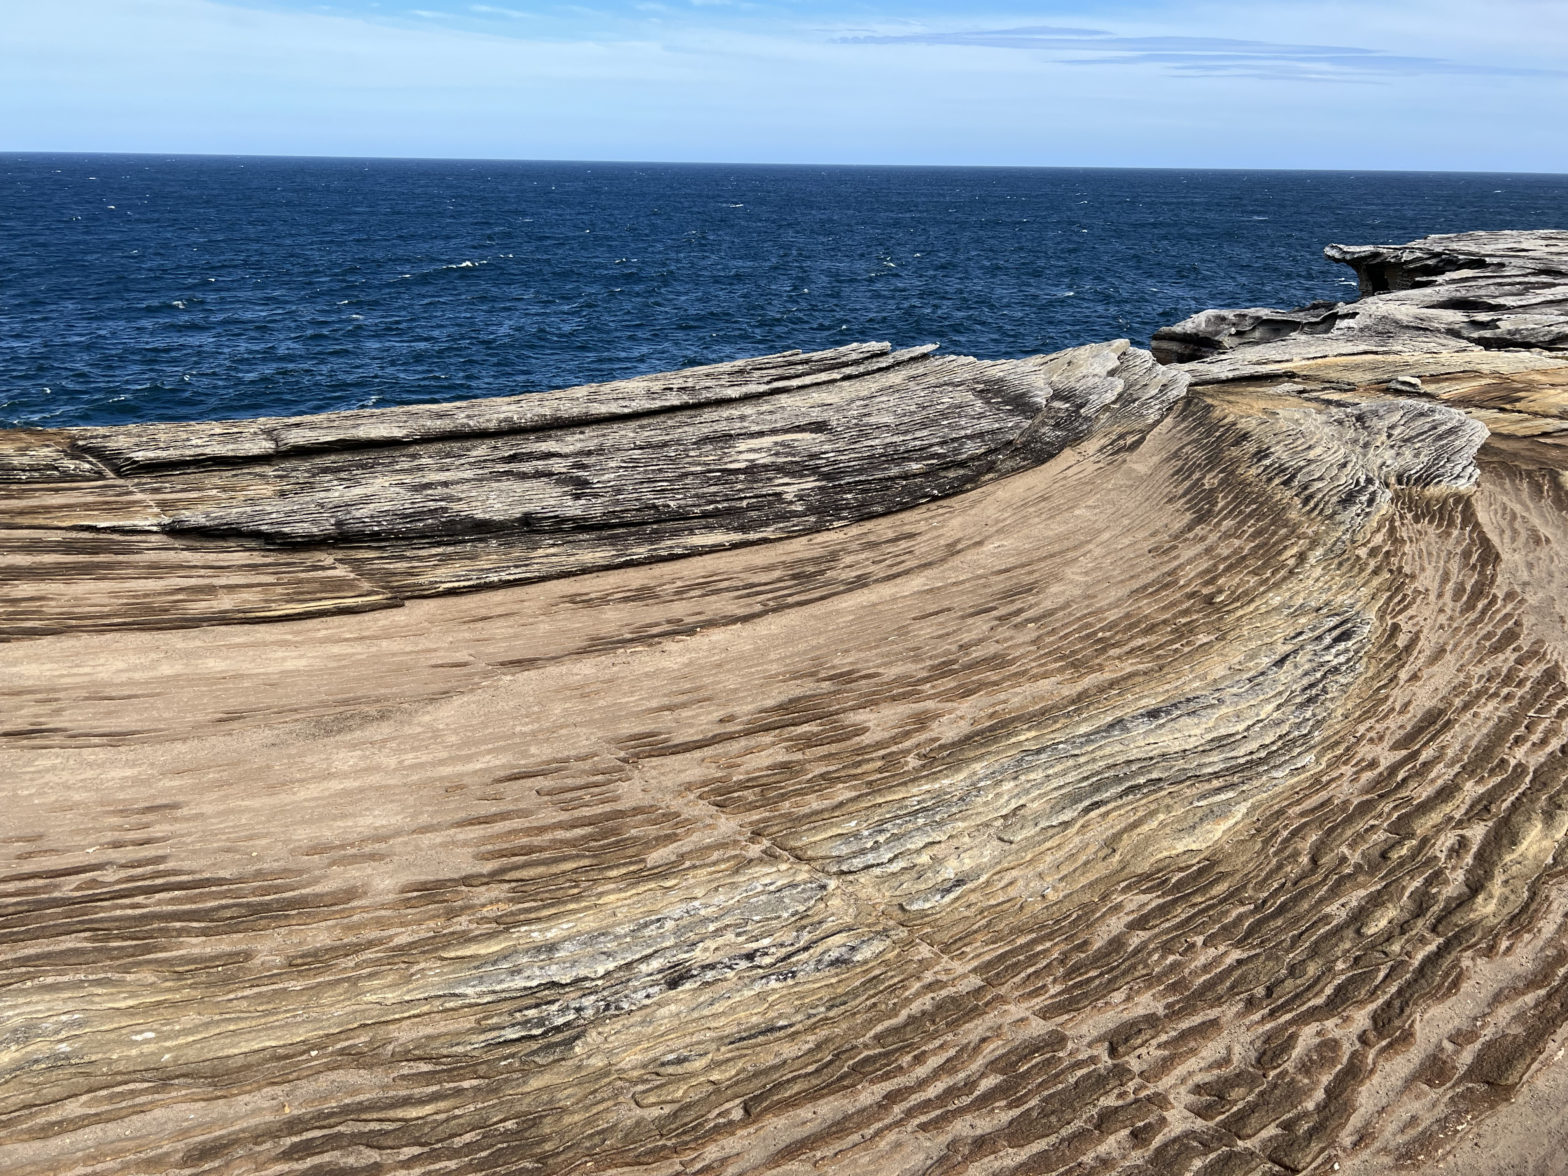 sandstone sculpted by wind and rain into wave forms, in shades of rust, beige, and ochre, with deep blue ocean and a light blue sky beyond